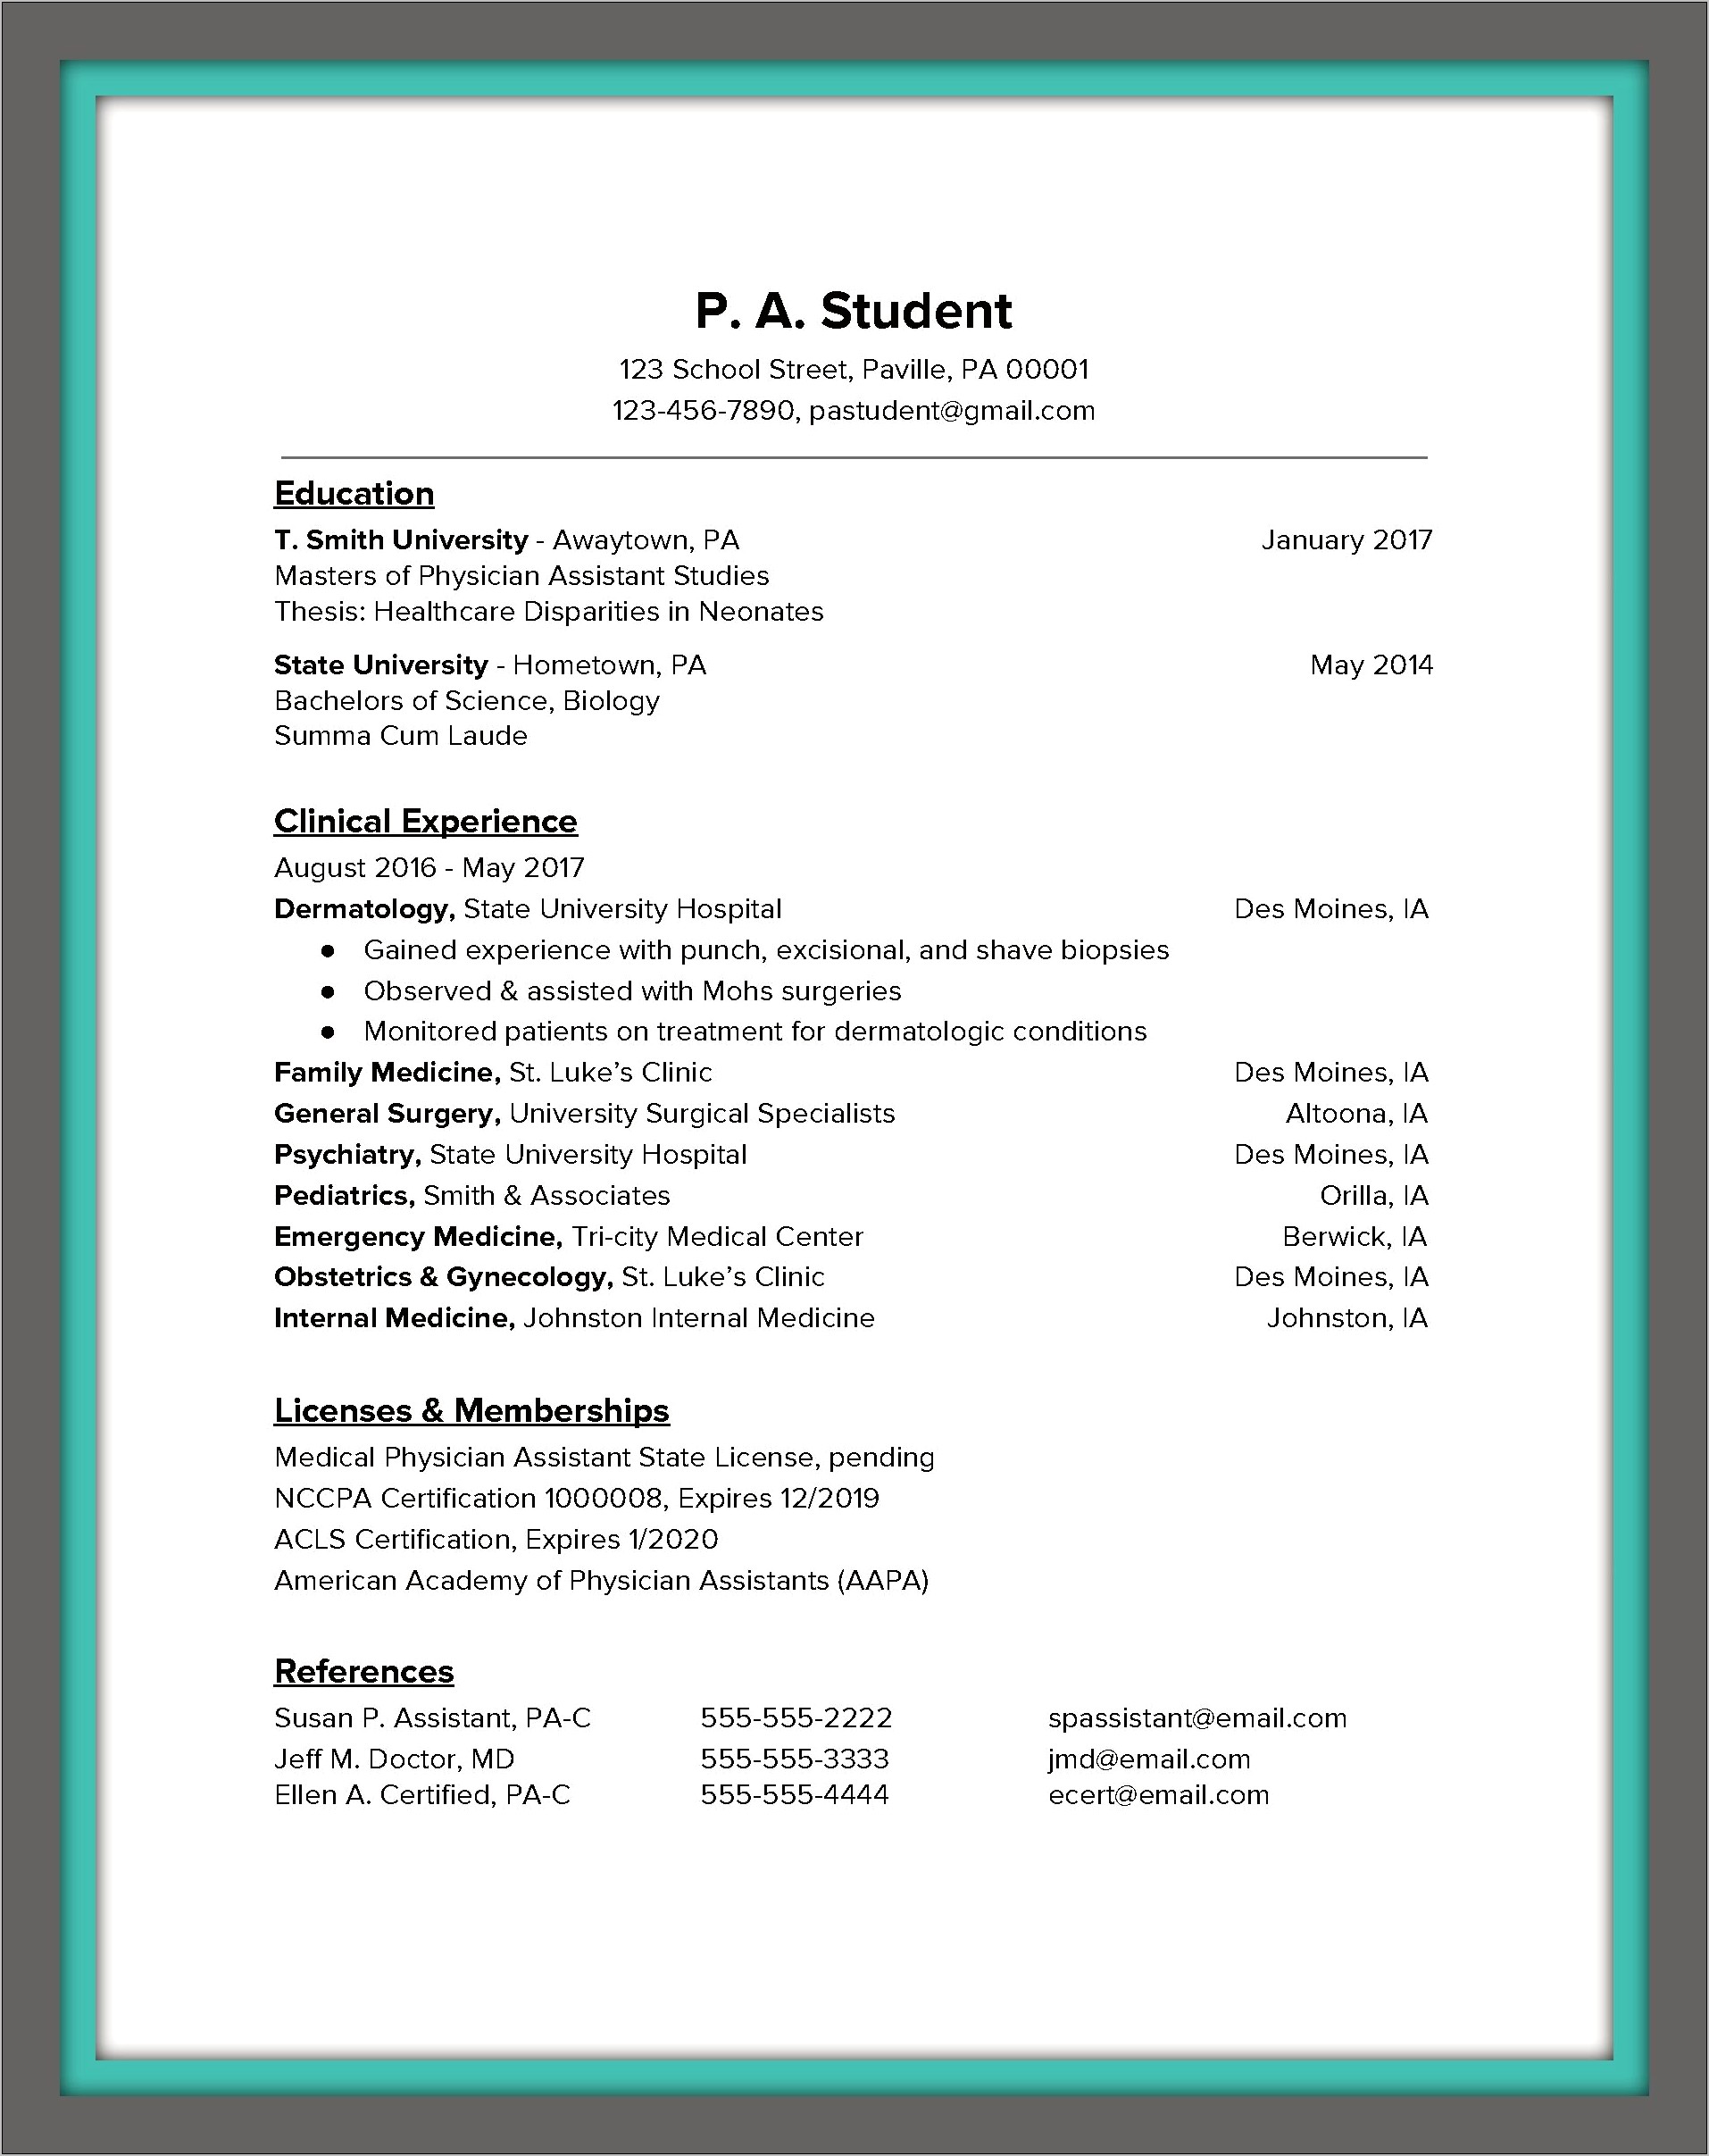 Resume With Masters And Bachelors From Same School